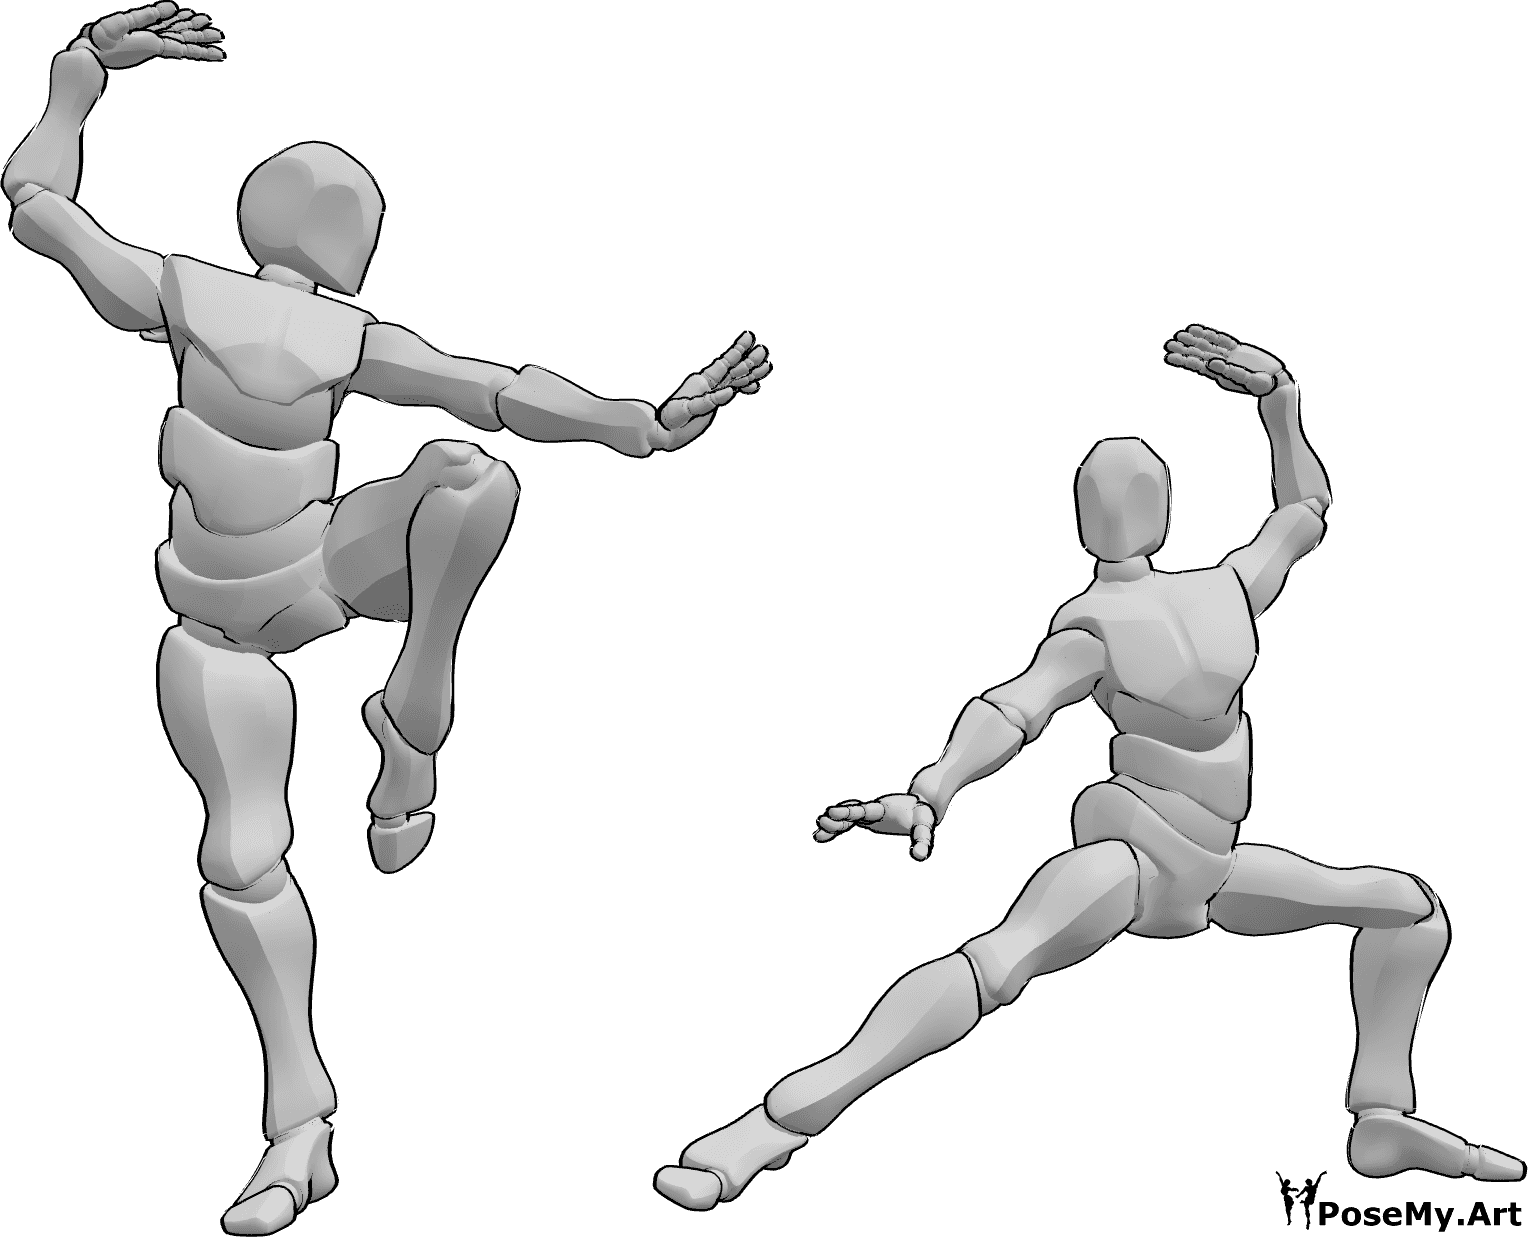 Pose Reference - Males tai chi pose - Two males are doing tai chi together, tai chi pose